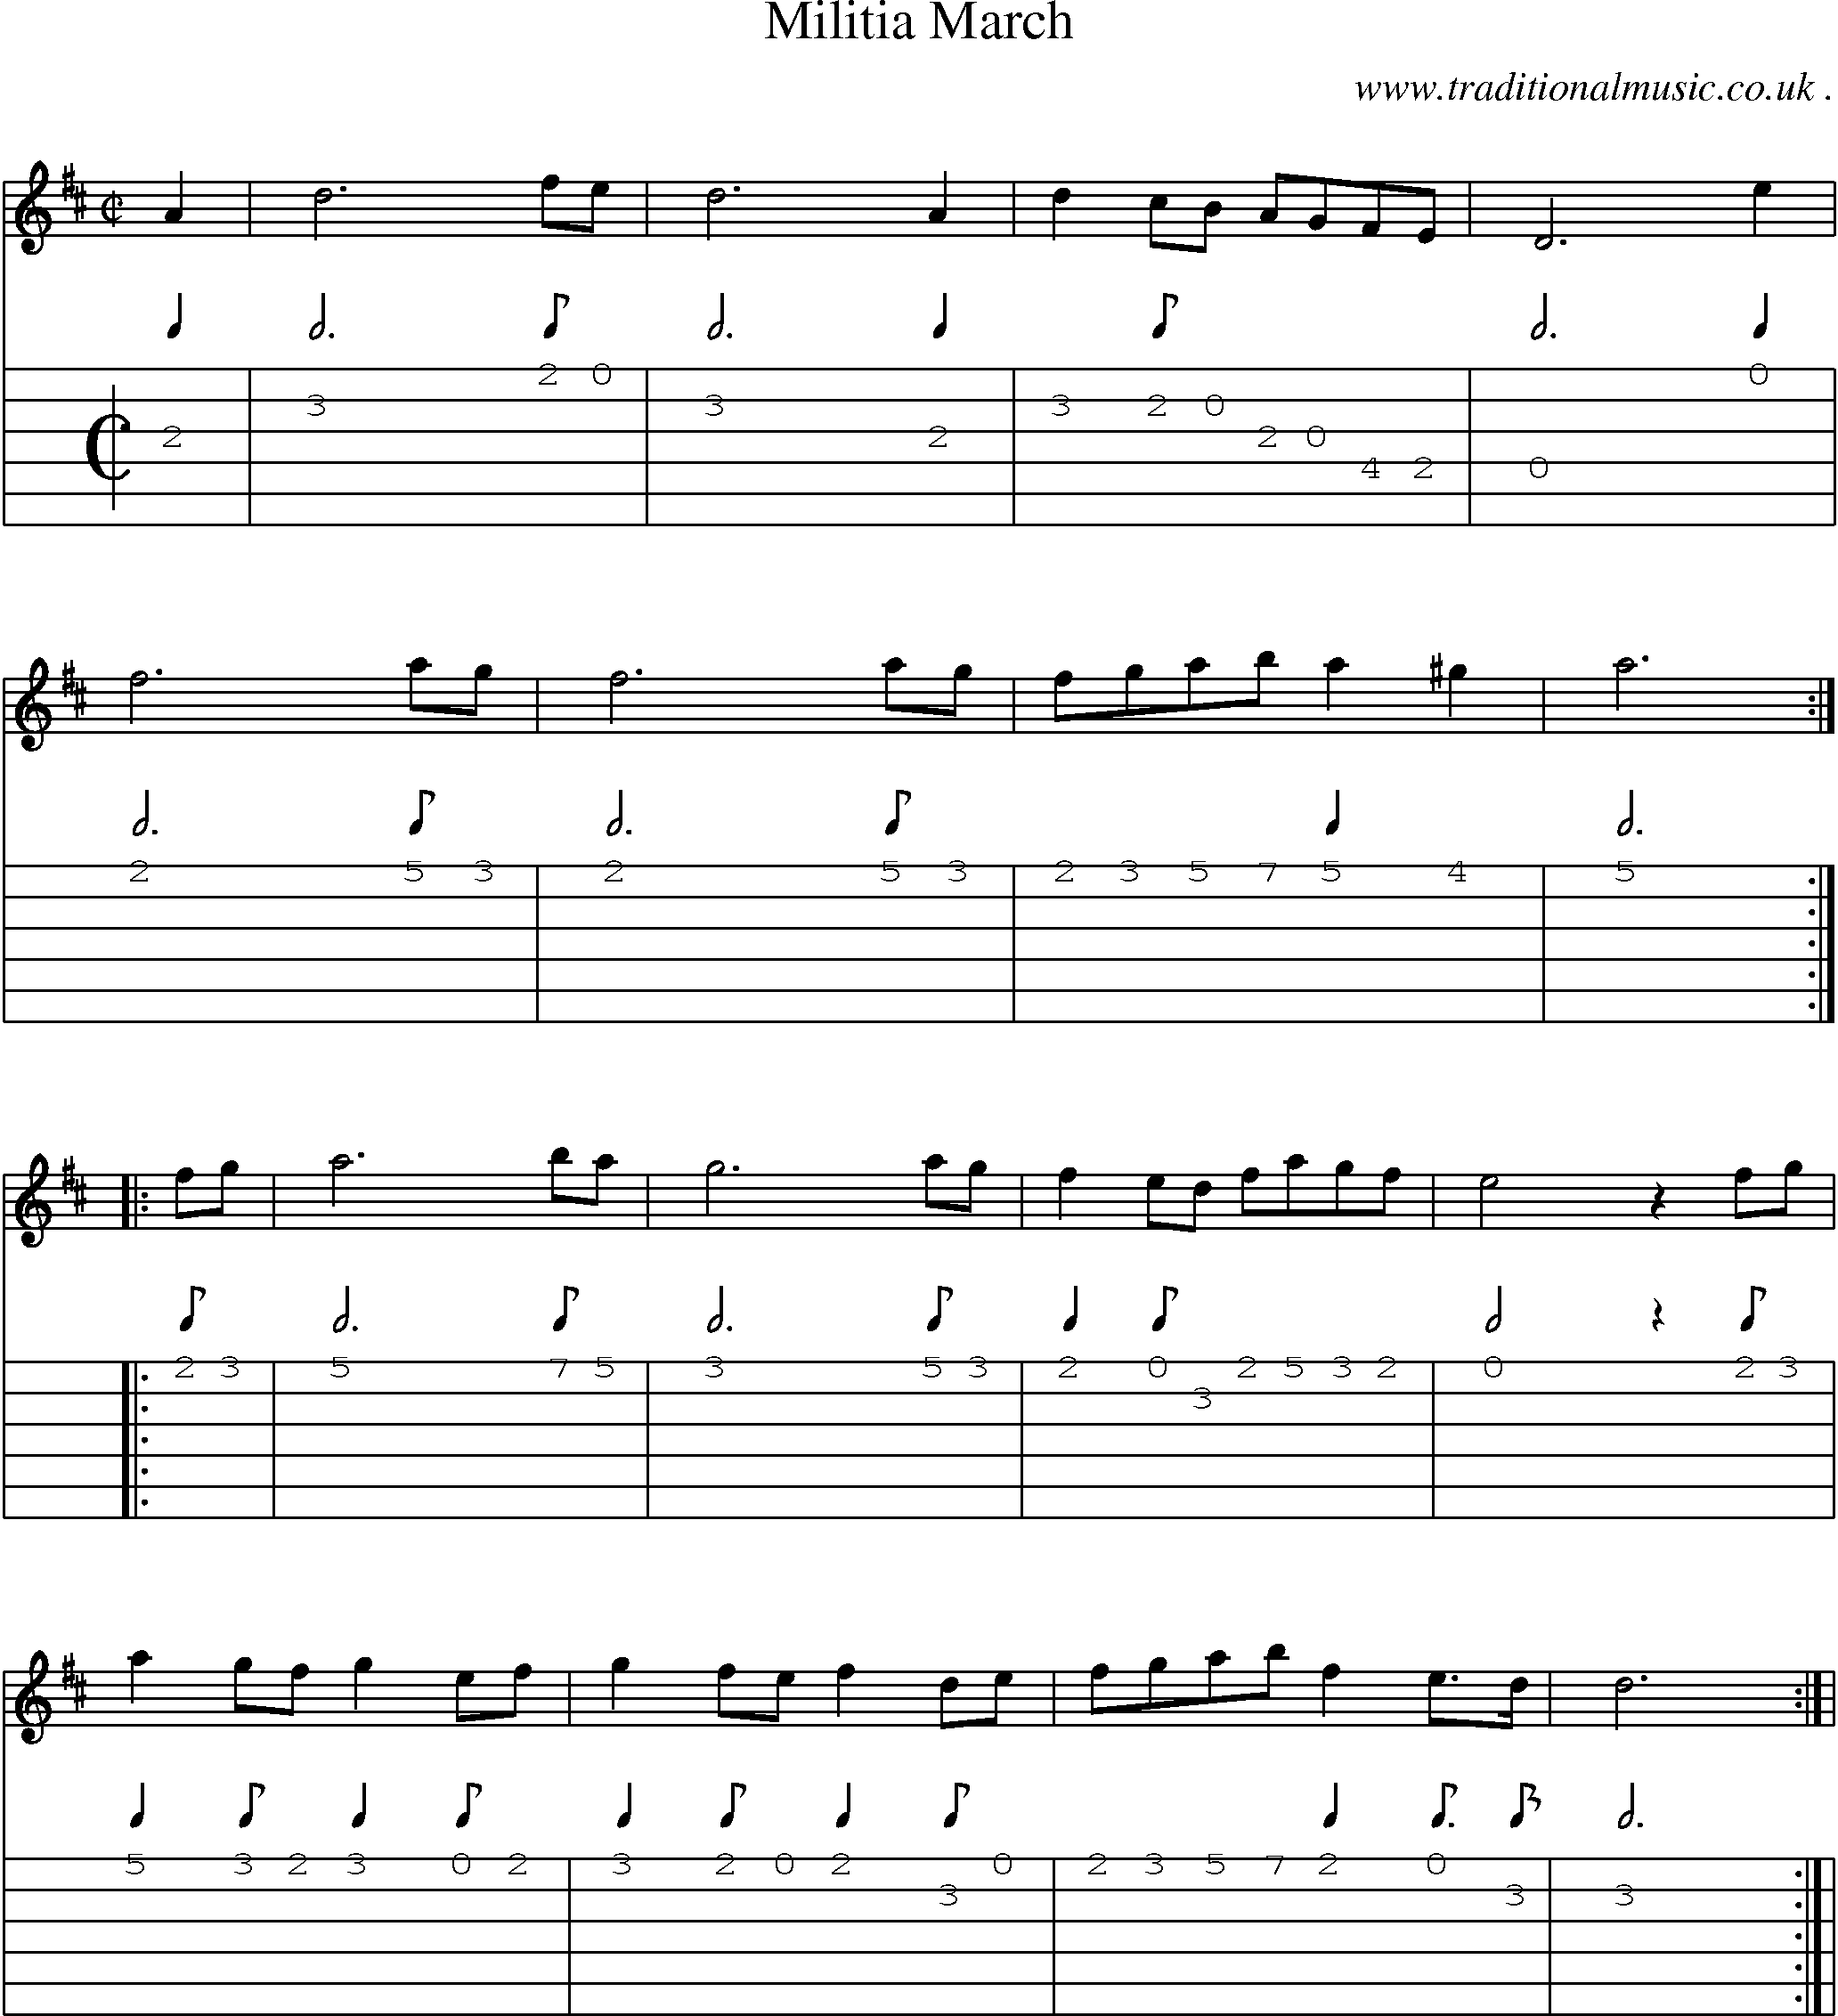 Sheet-Music and Guitar Tabs for Militia March